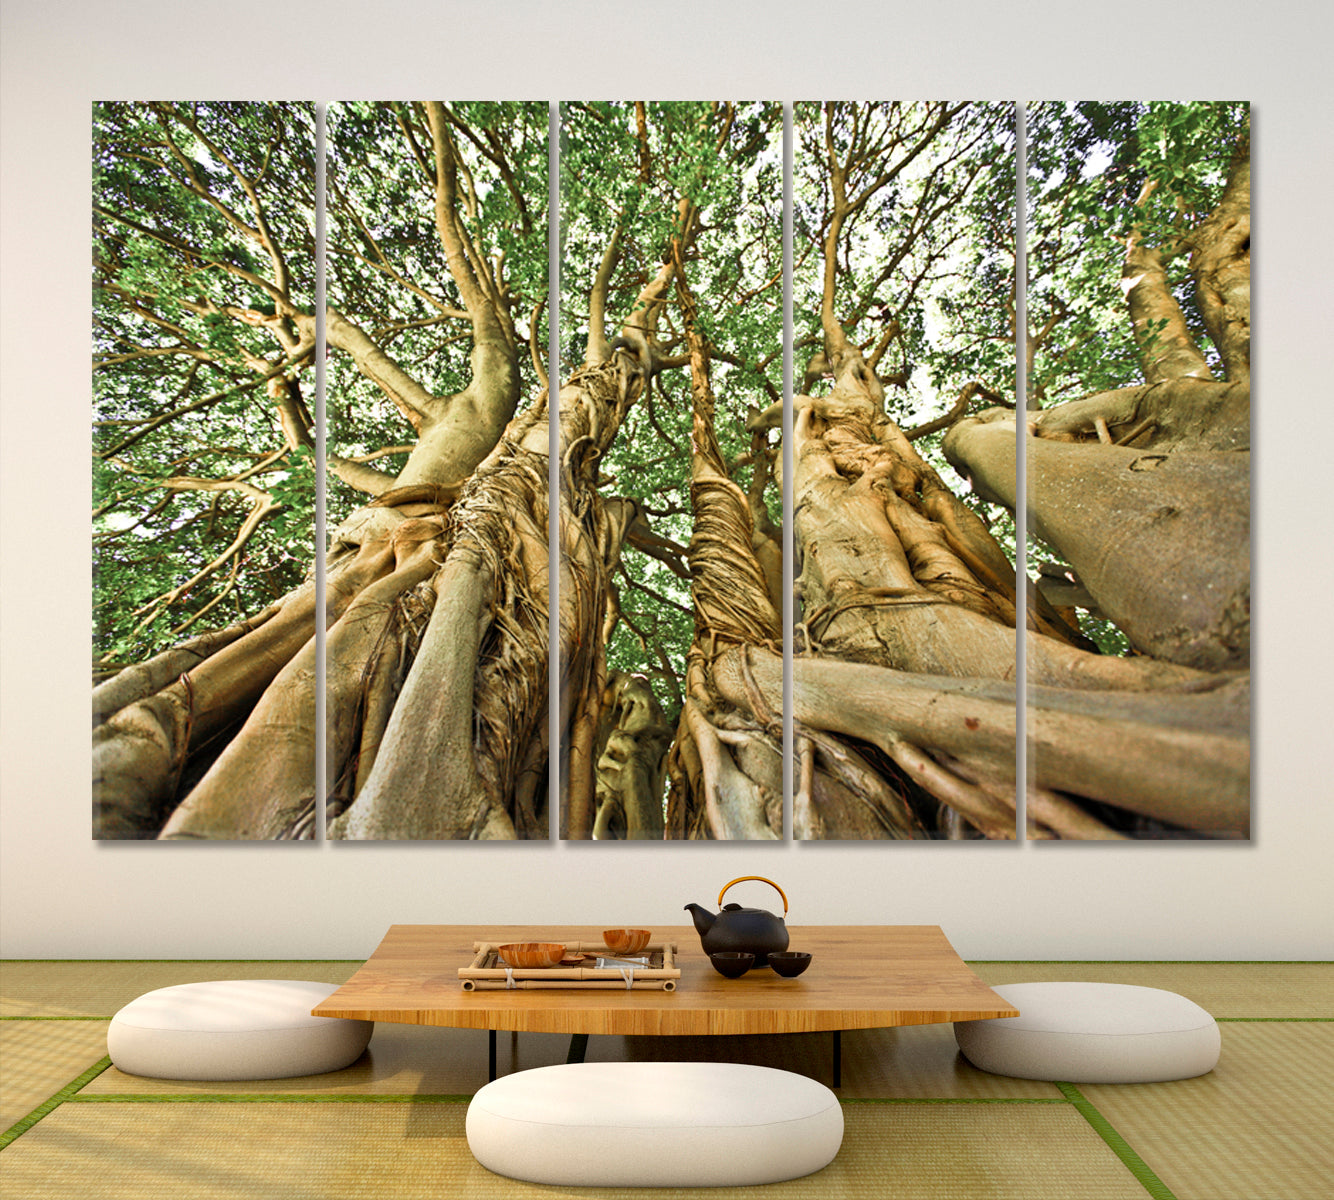 UNIQUE TREE FORMATION Giant Old Tree Africa Forest Huge Baobab Nature Wall Canvas Print Artesty 5 panels 36" x 24" 